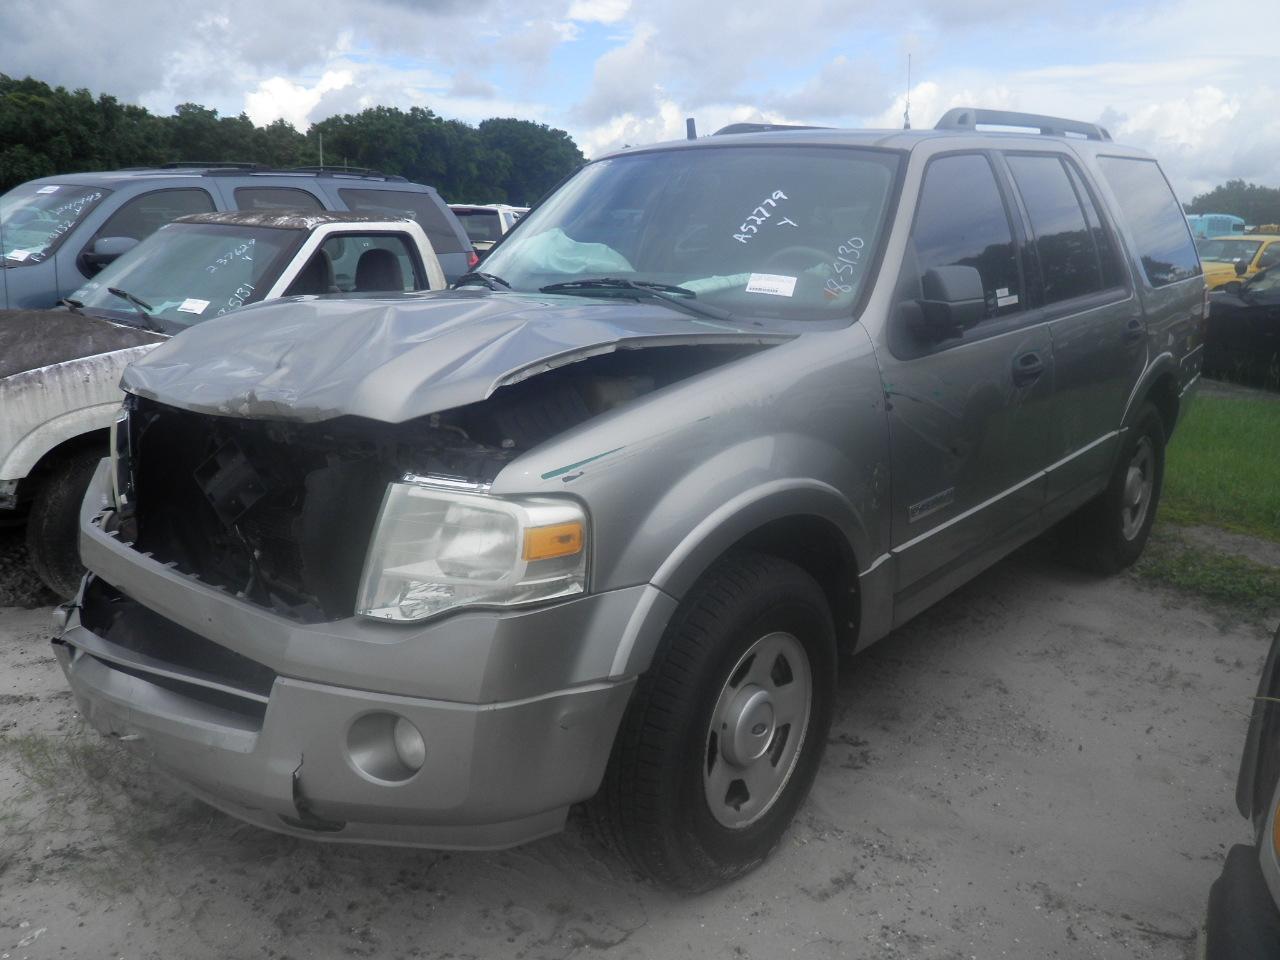 8-05130 (Cars-SUV 4D)  Seller: Florida State F.W.C. 2008 FORD EXPEDITIO